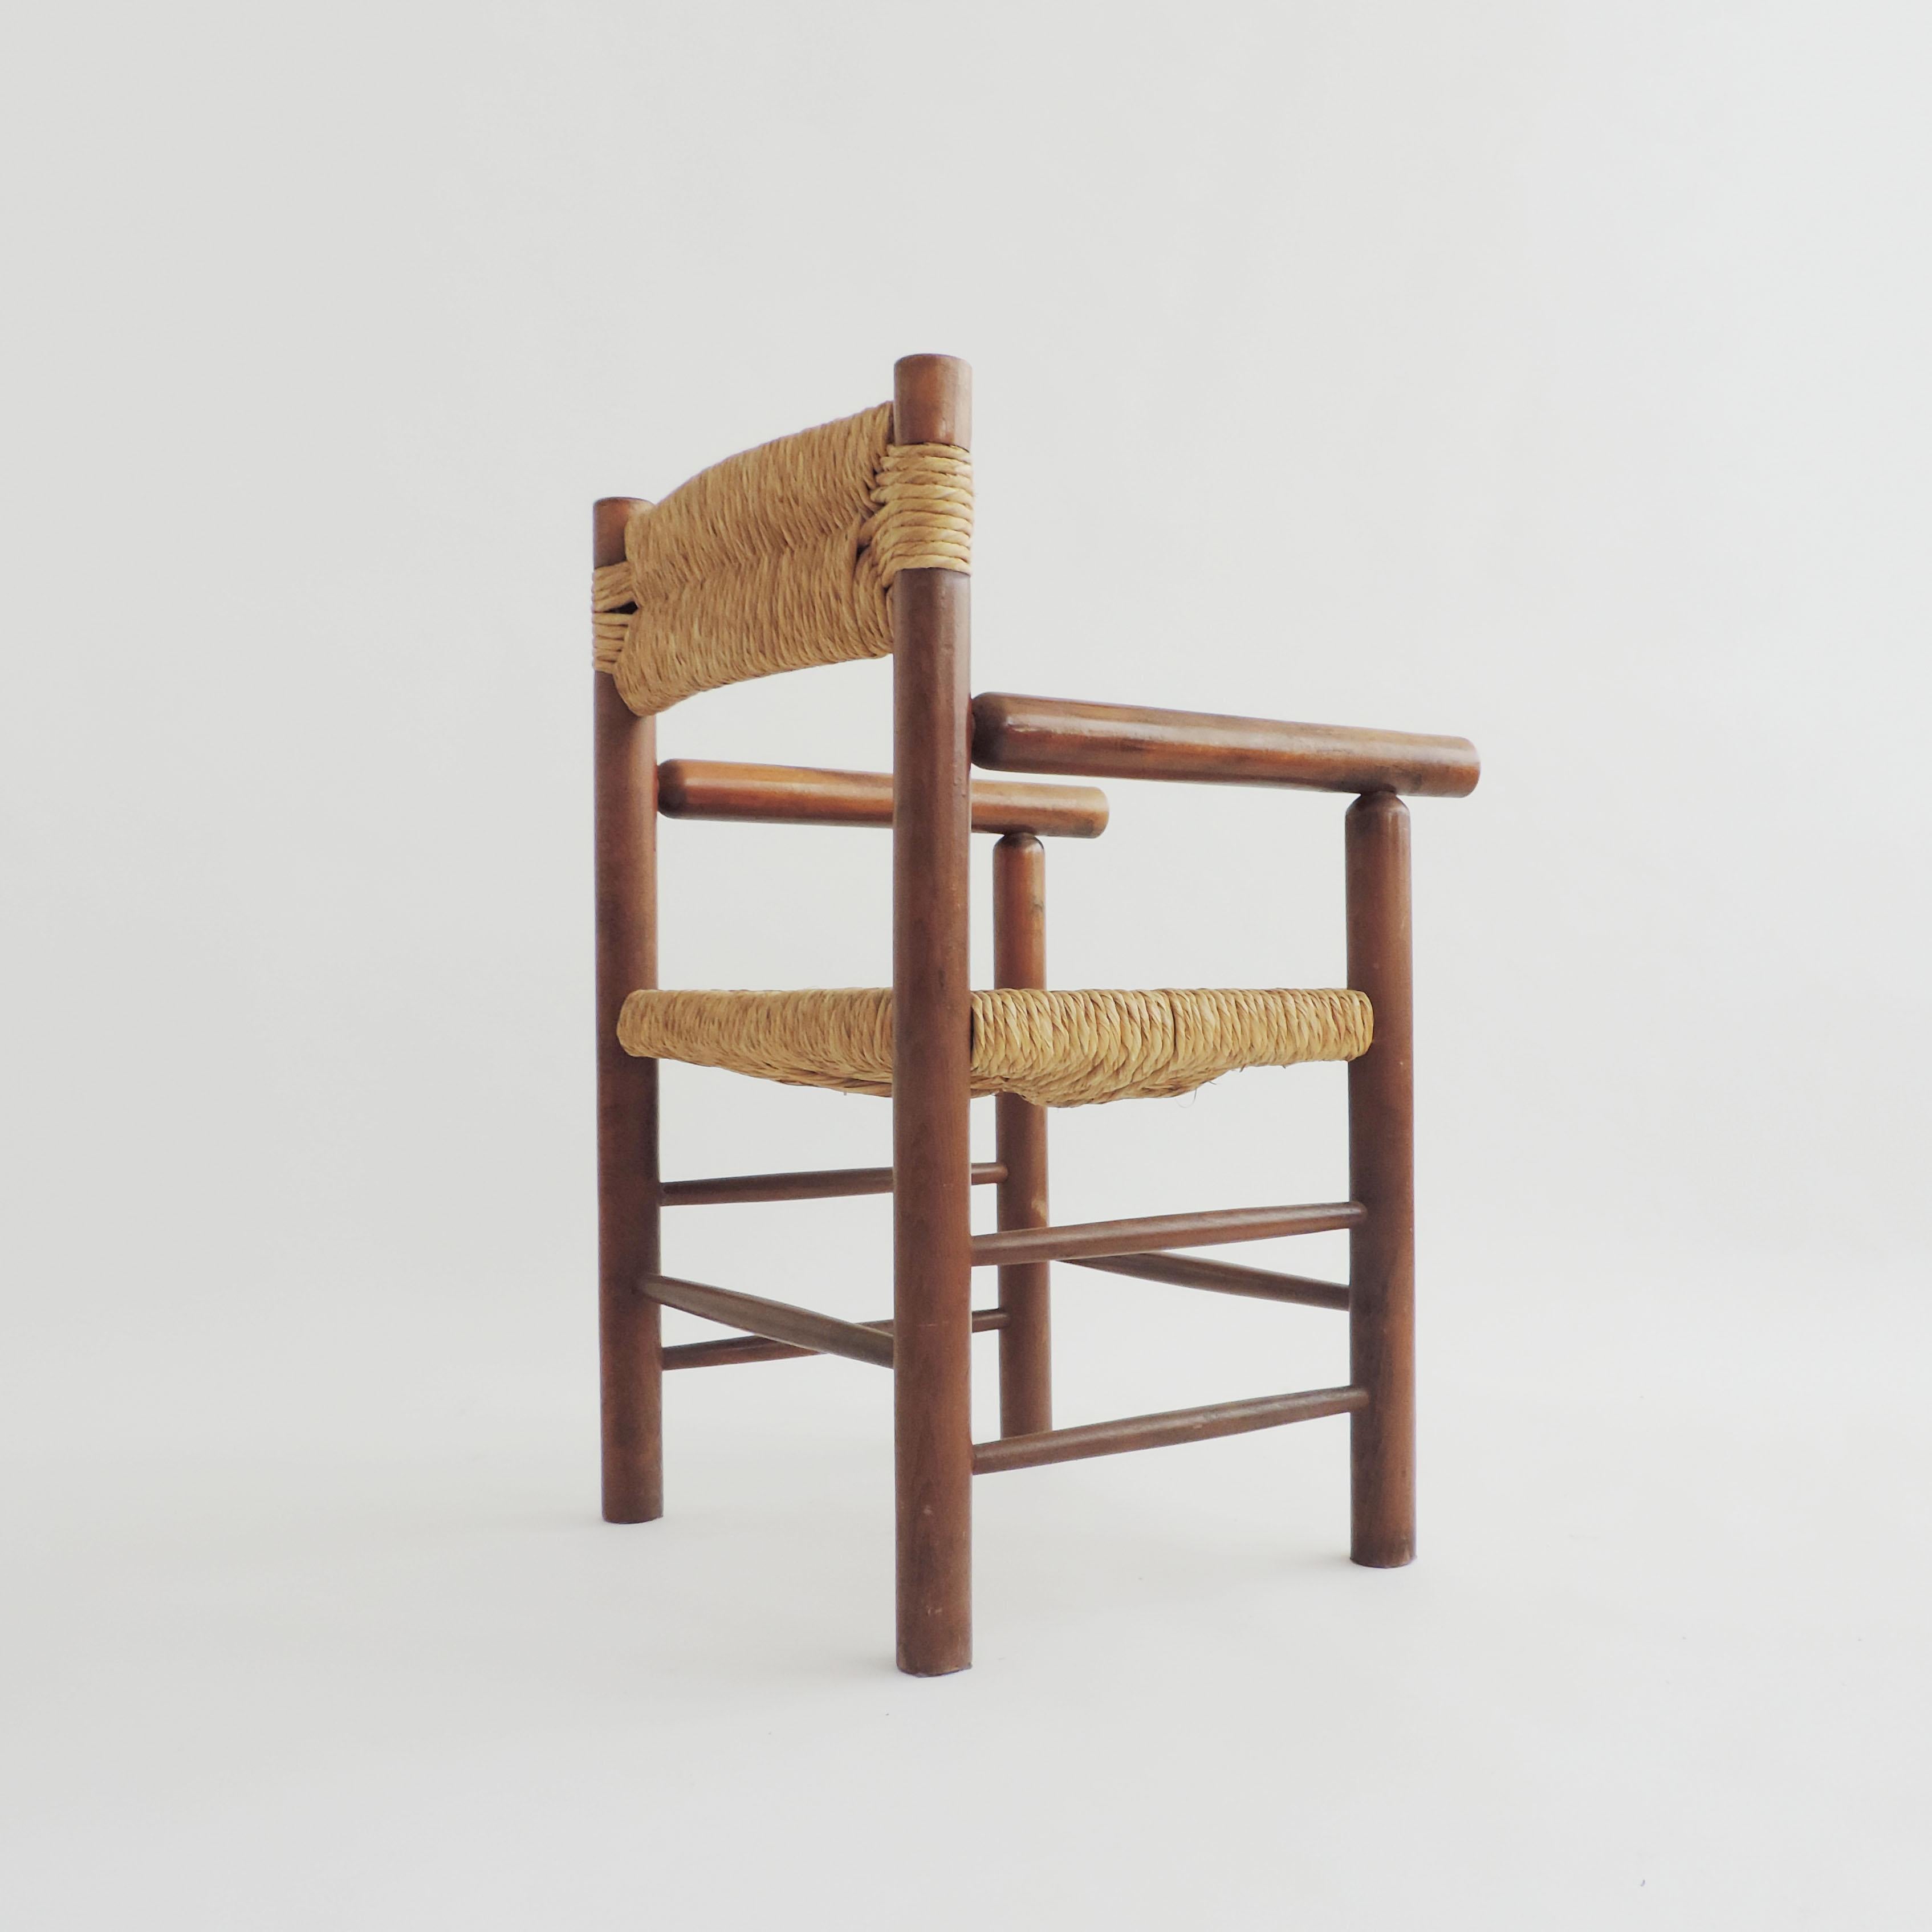 Italian 1960s Armchair in Straw and Wood in the Style of Charlotte Perriand For Sale 5